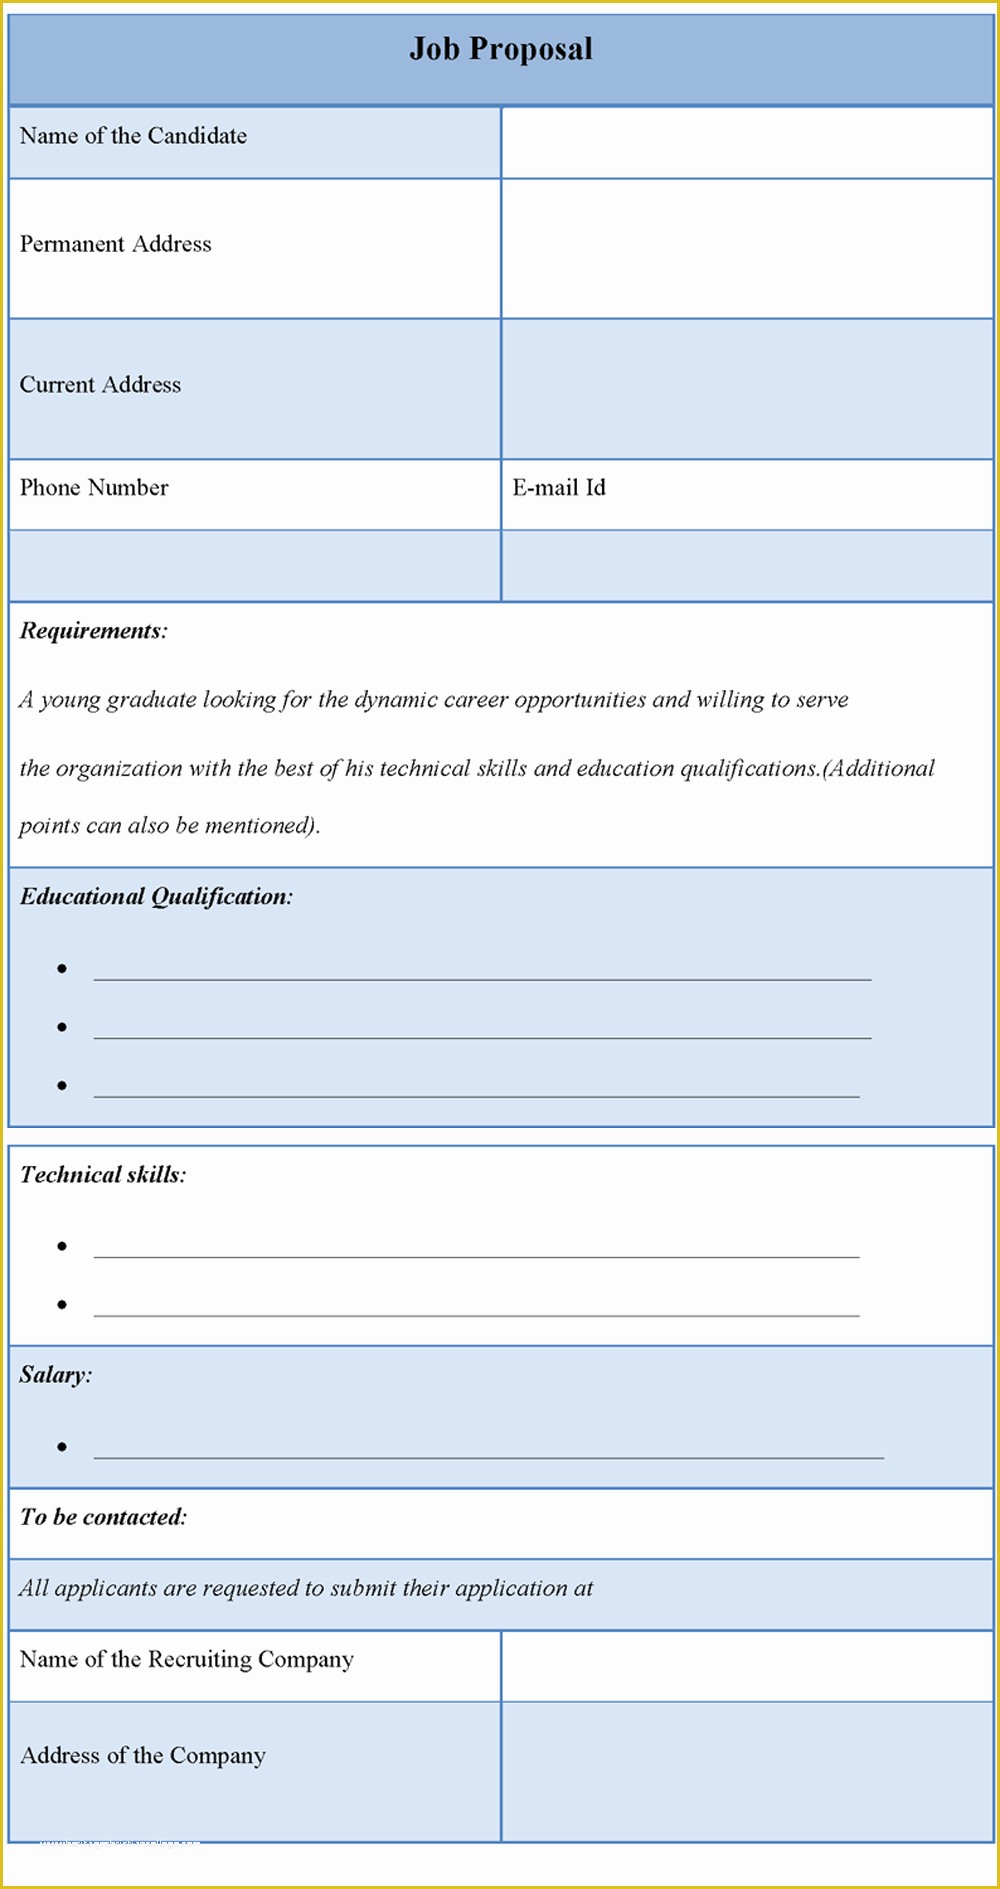 Job Proposal Template Free Download Of Download Free software Proposal Template Sample Free